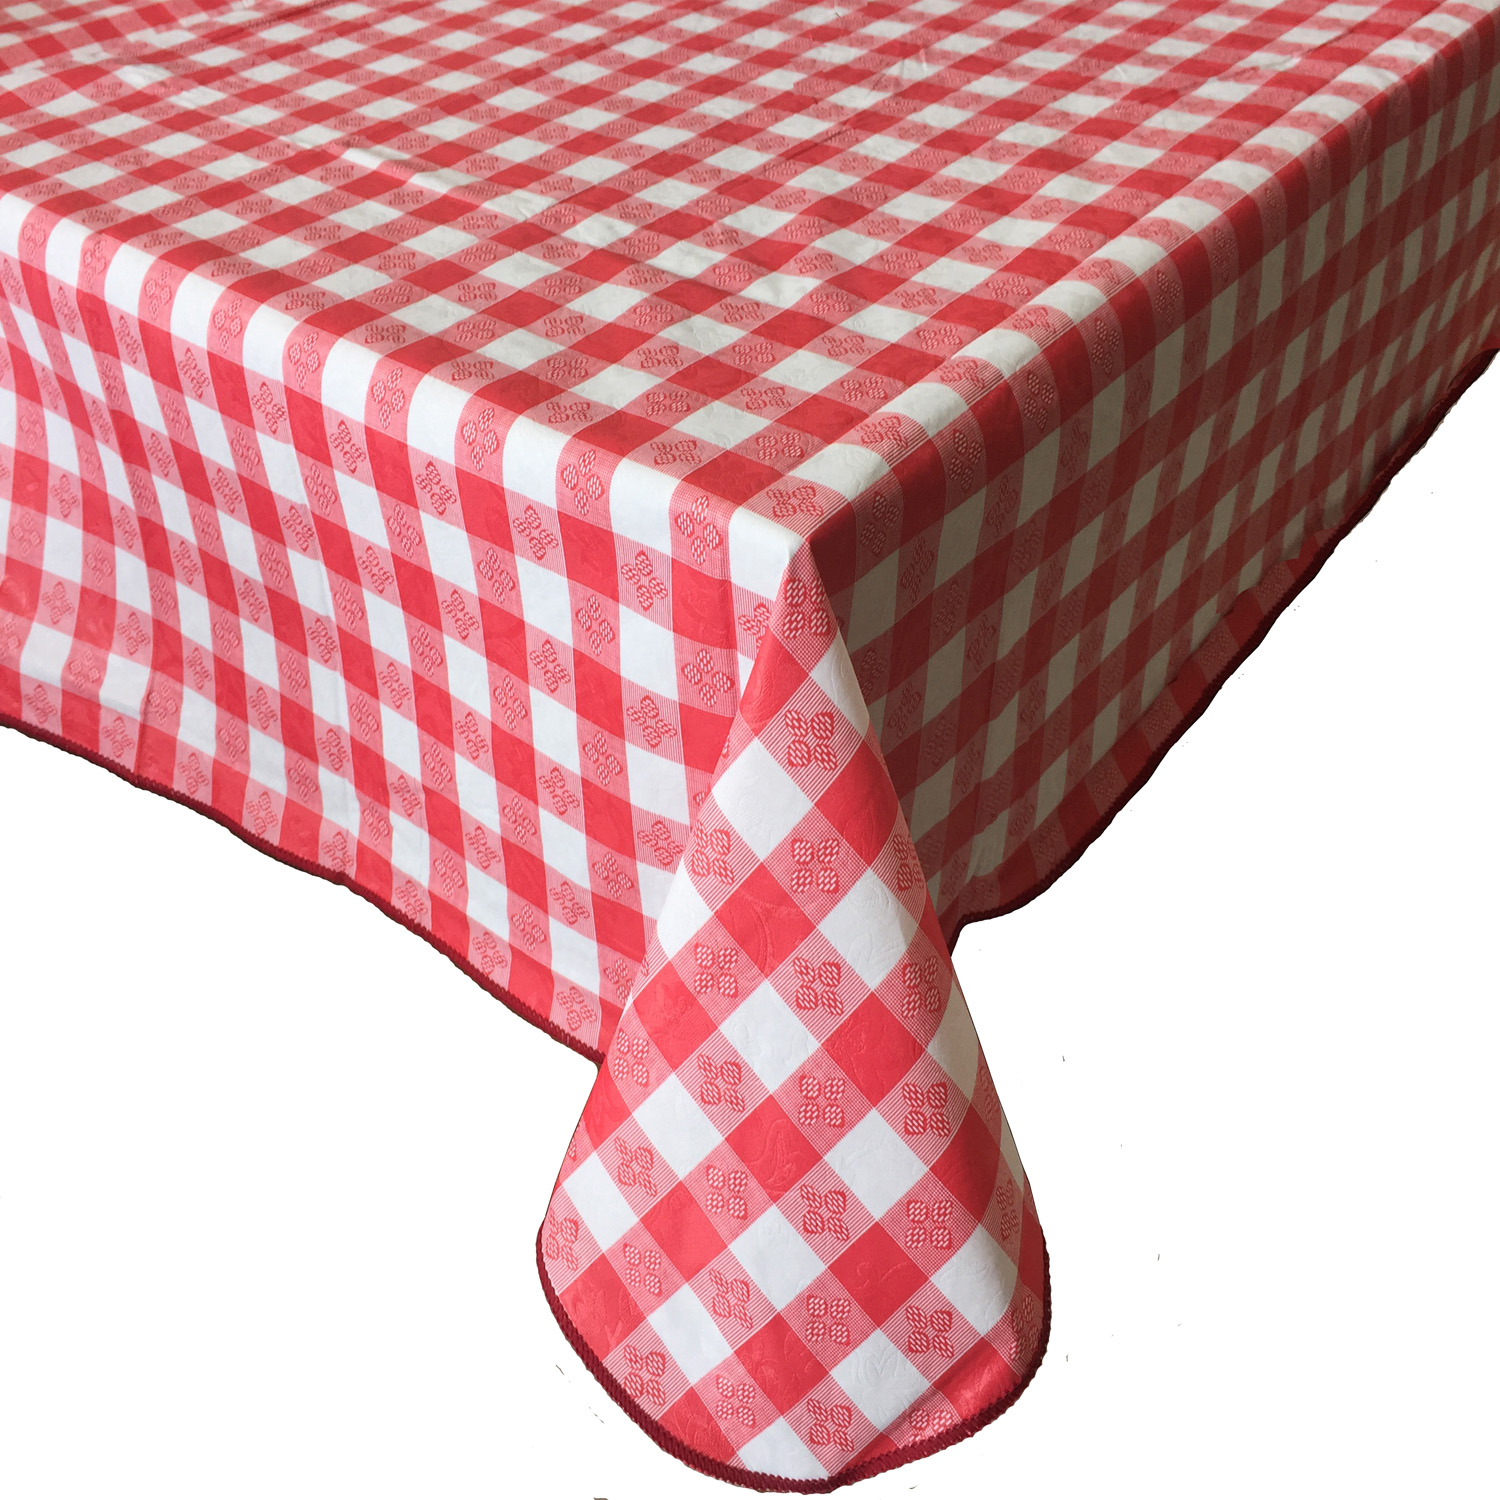 CAC China TCVG-52R Red Vinyl Table Cover with Flannel Back 52" x 52"